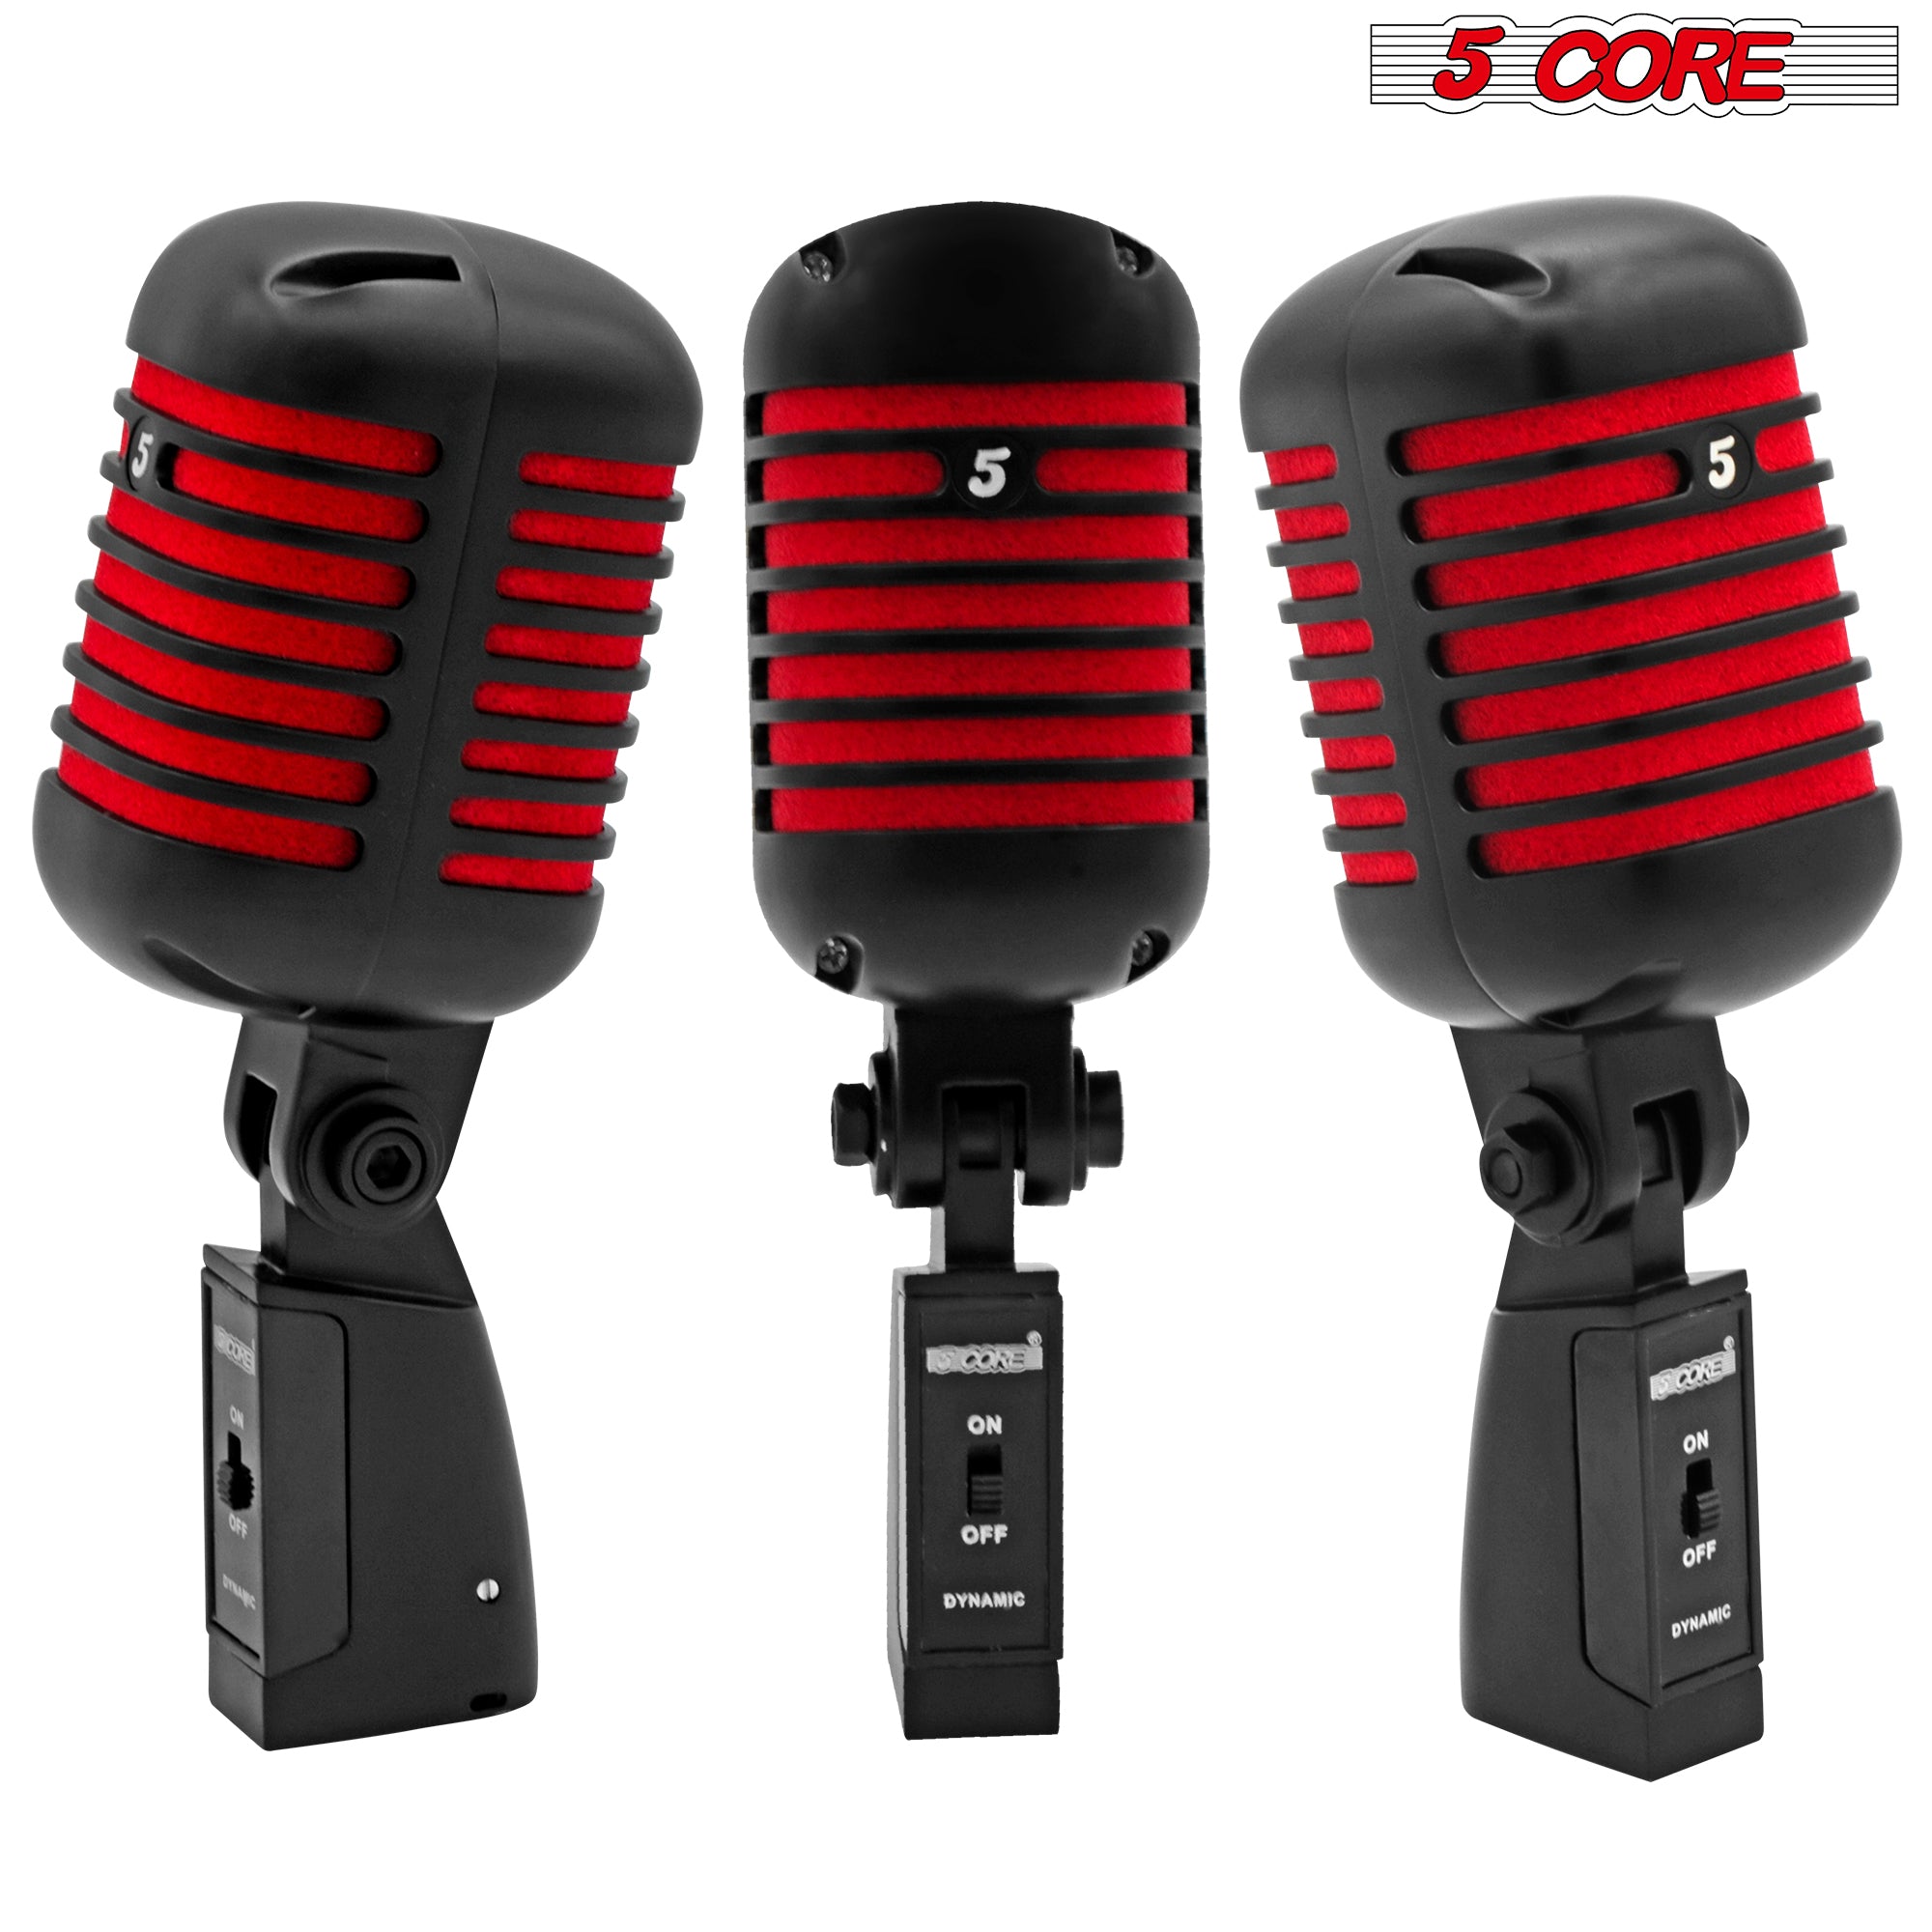 5 Core Classic Retro Dynamic Vocal Microphone Matte Black Red Old Vintage Style Unidirectional Professional Cardioid Mic for Instrument Live Performance Prop & Studio Recording -RTRO MIC CH BLK-RED